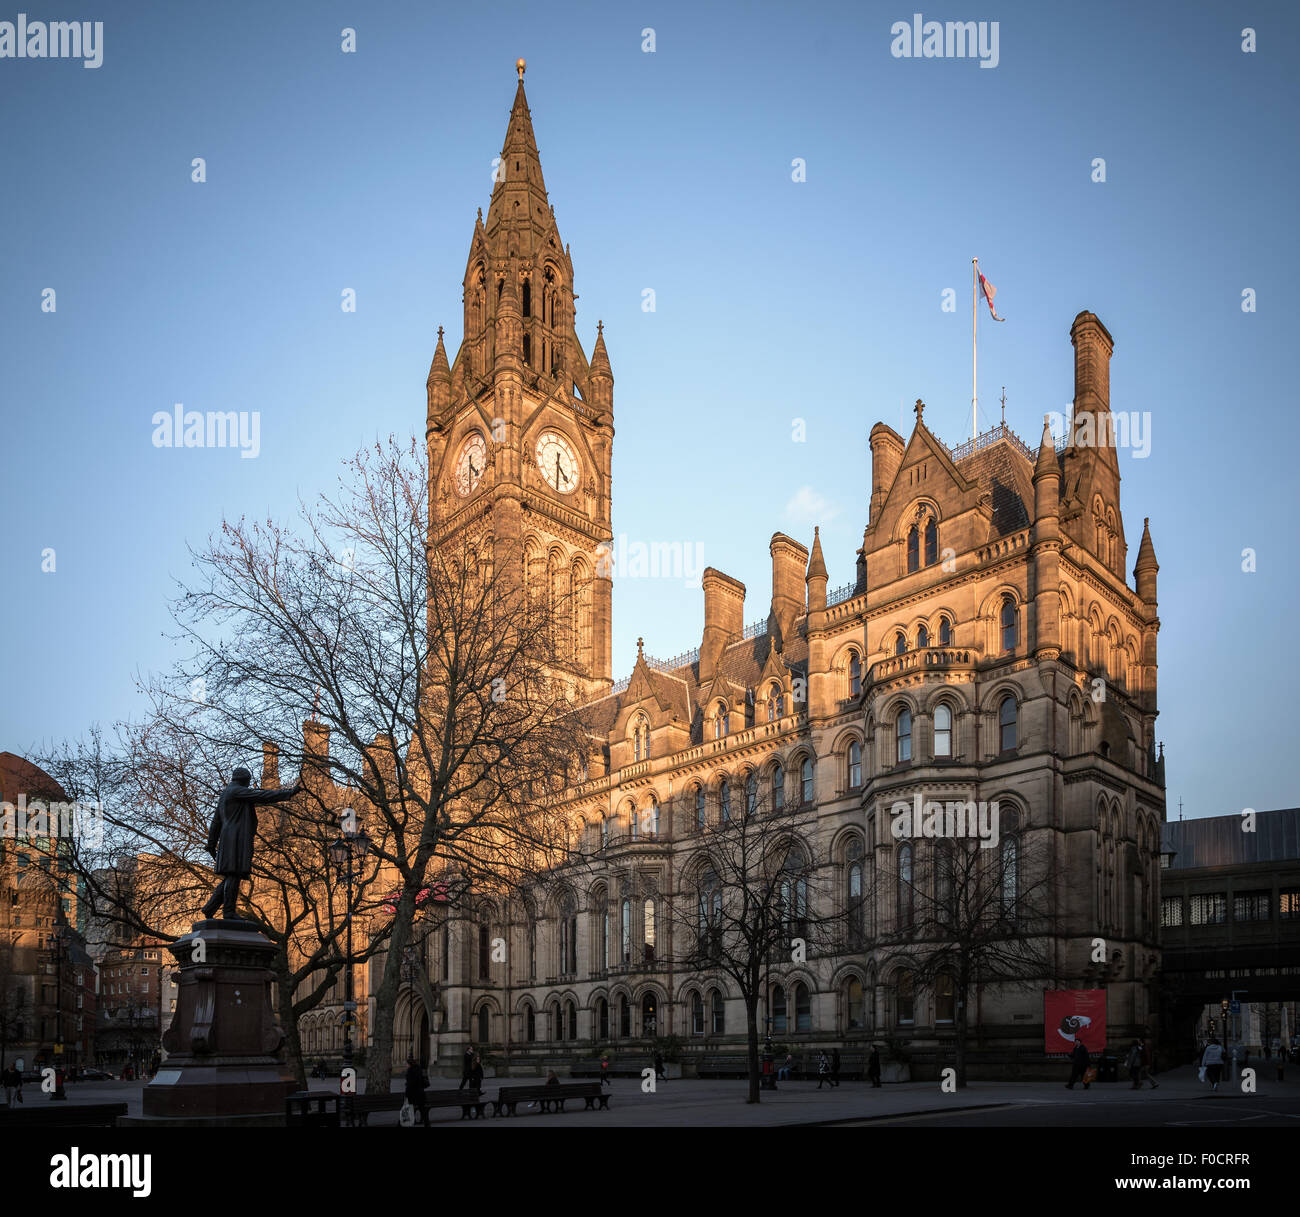 Manchester Town Hall is a Victorian, Neo-gothic municipal building in Manchester, England. Stock Photo